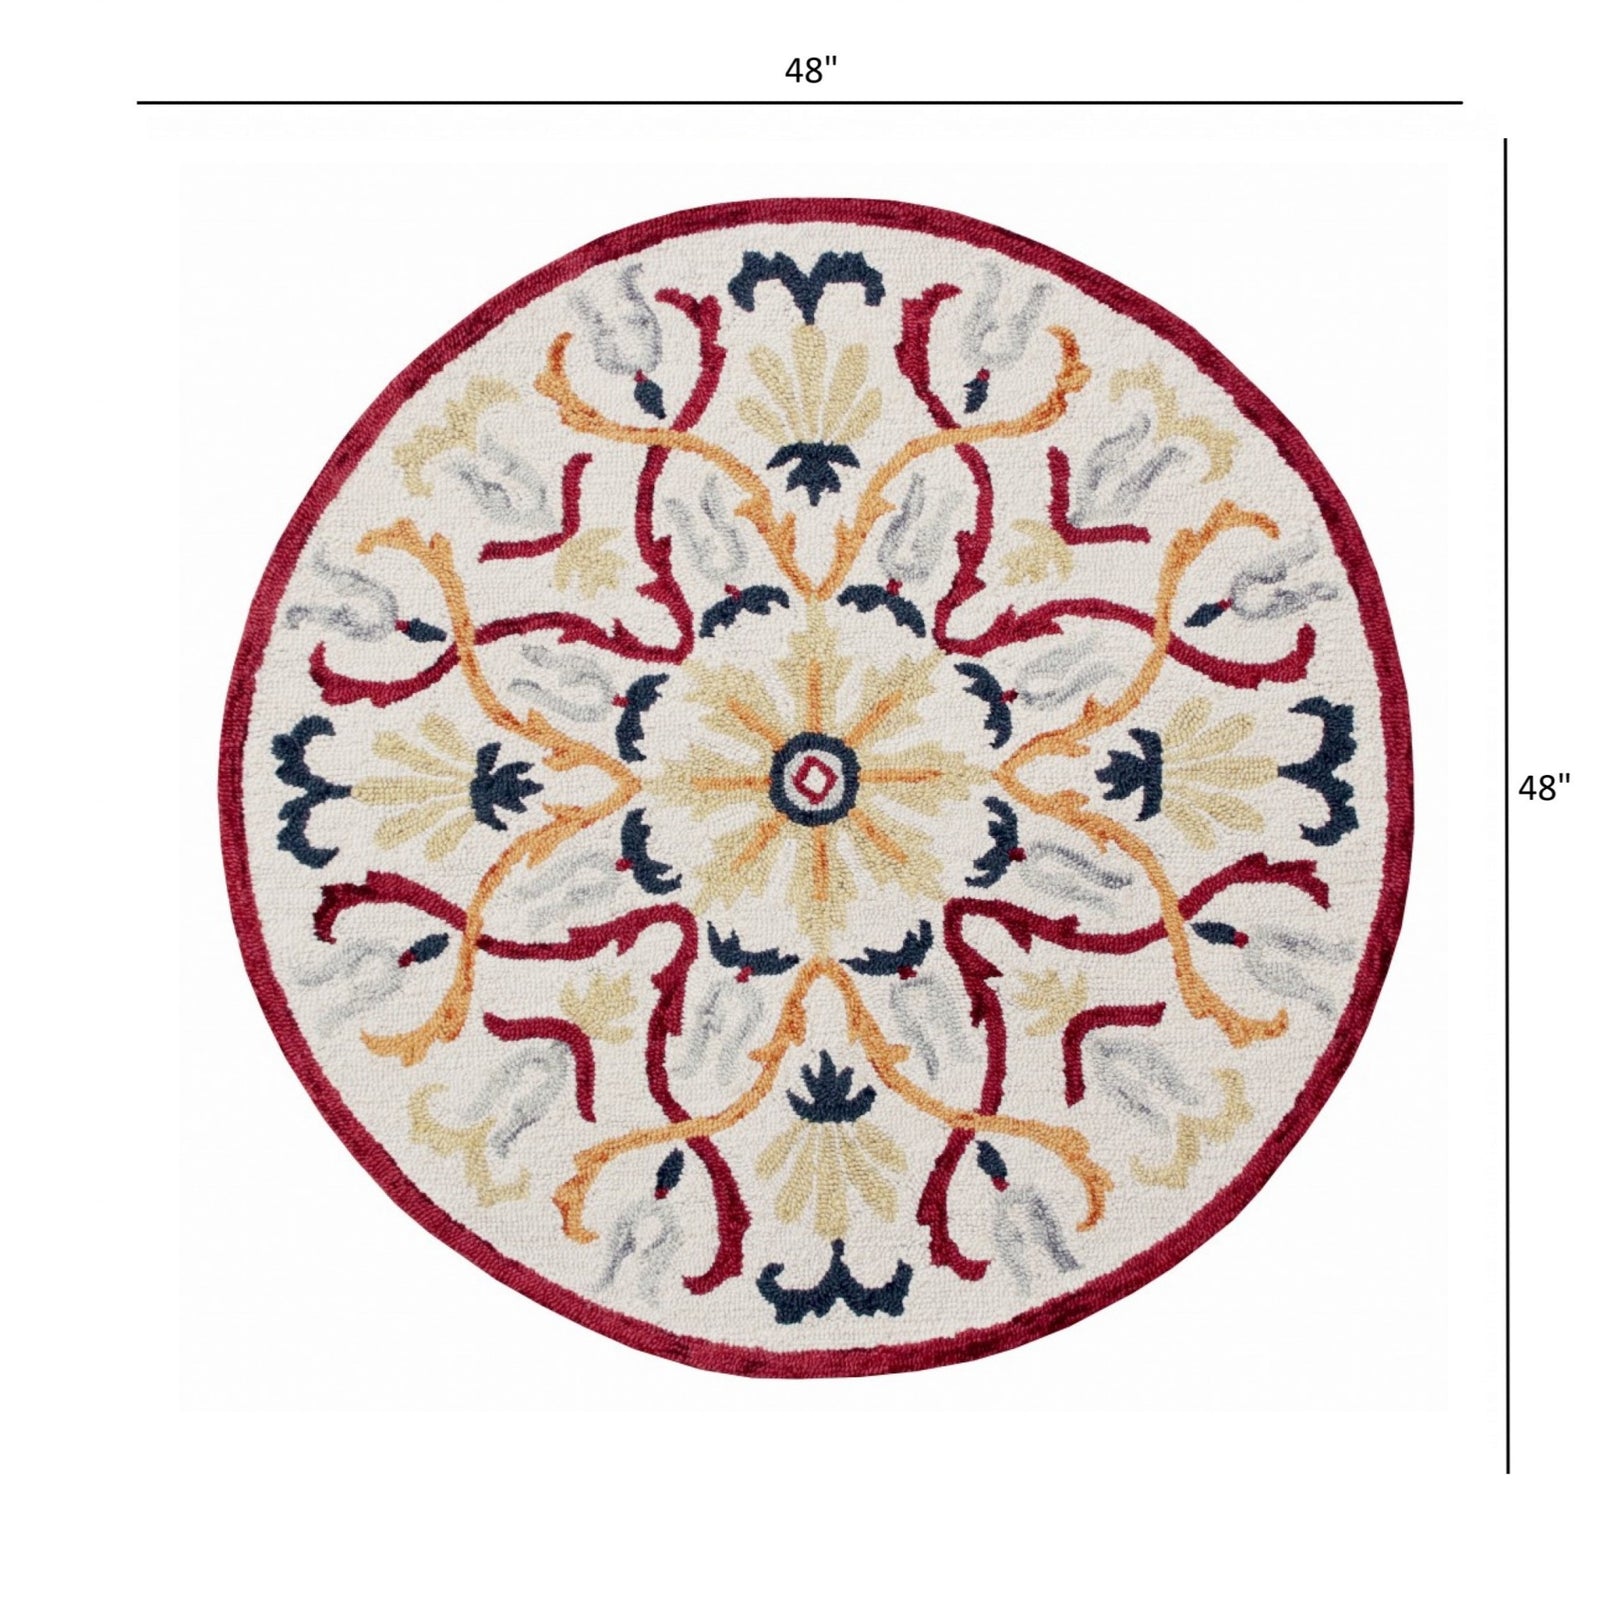 4’ Round Red and Ivory Floral Filigree Area Rug